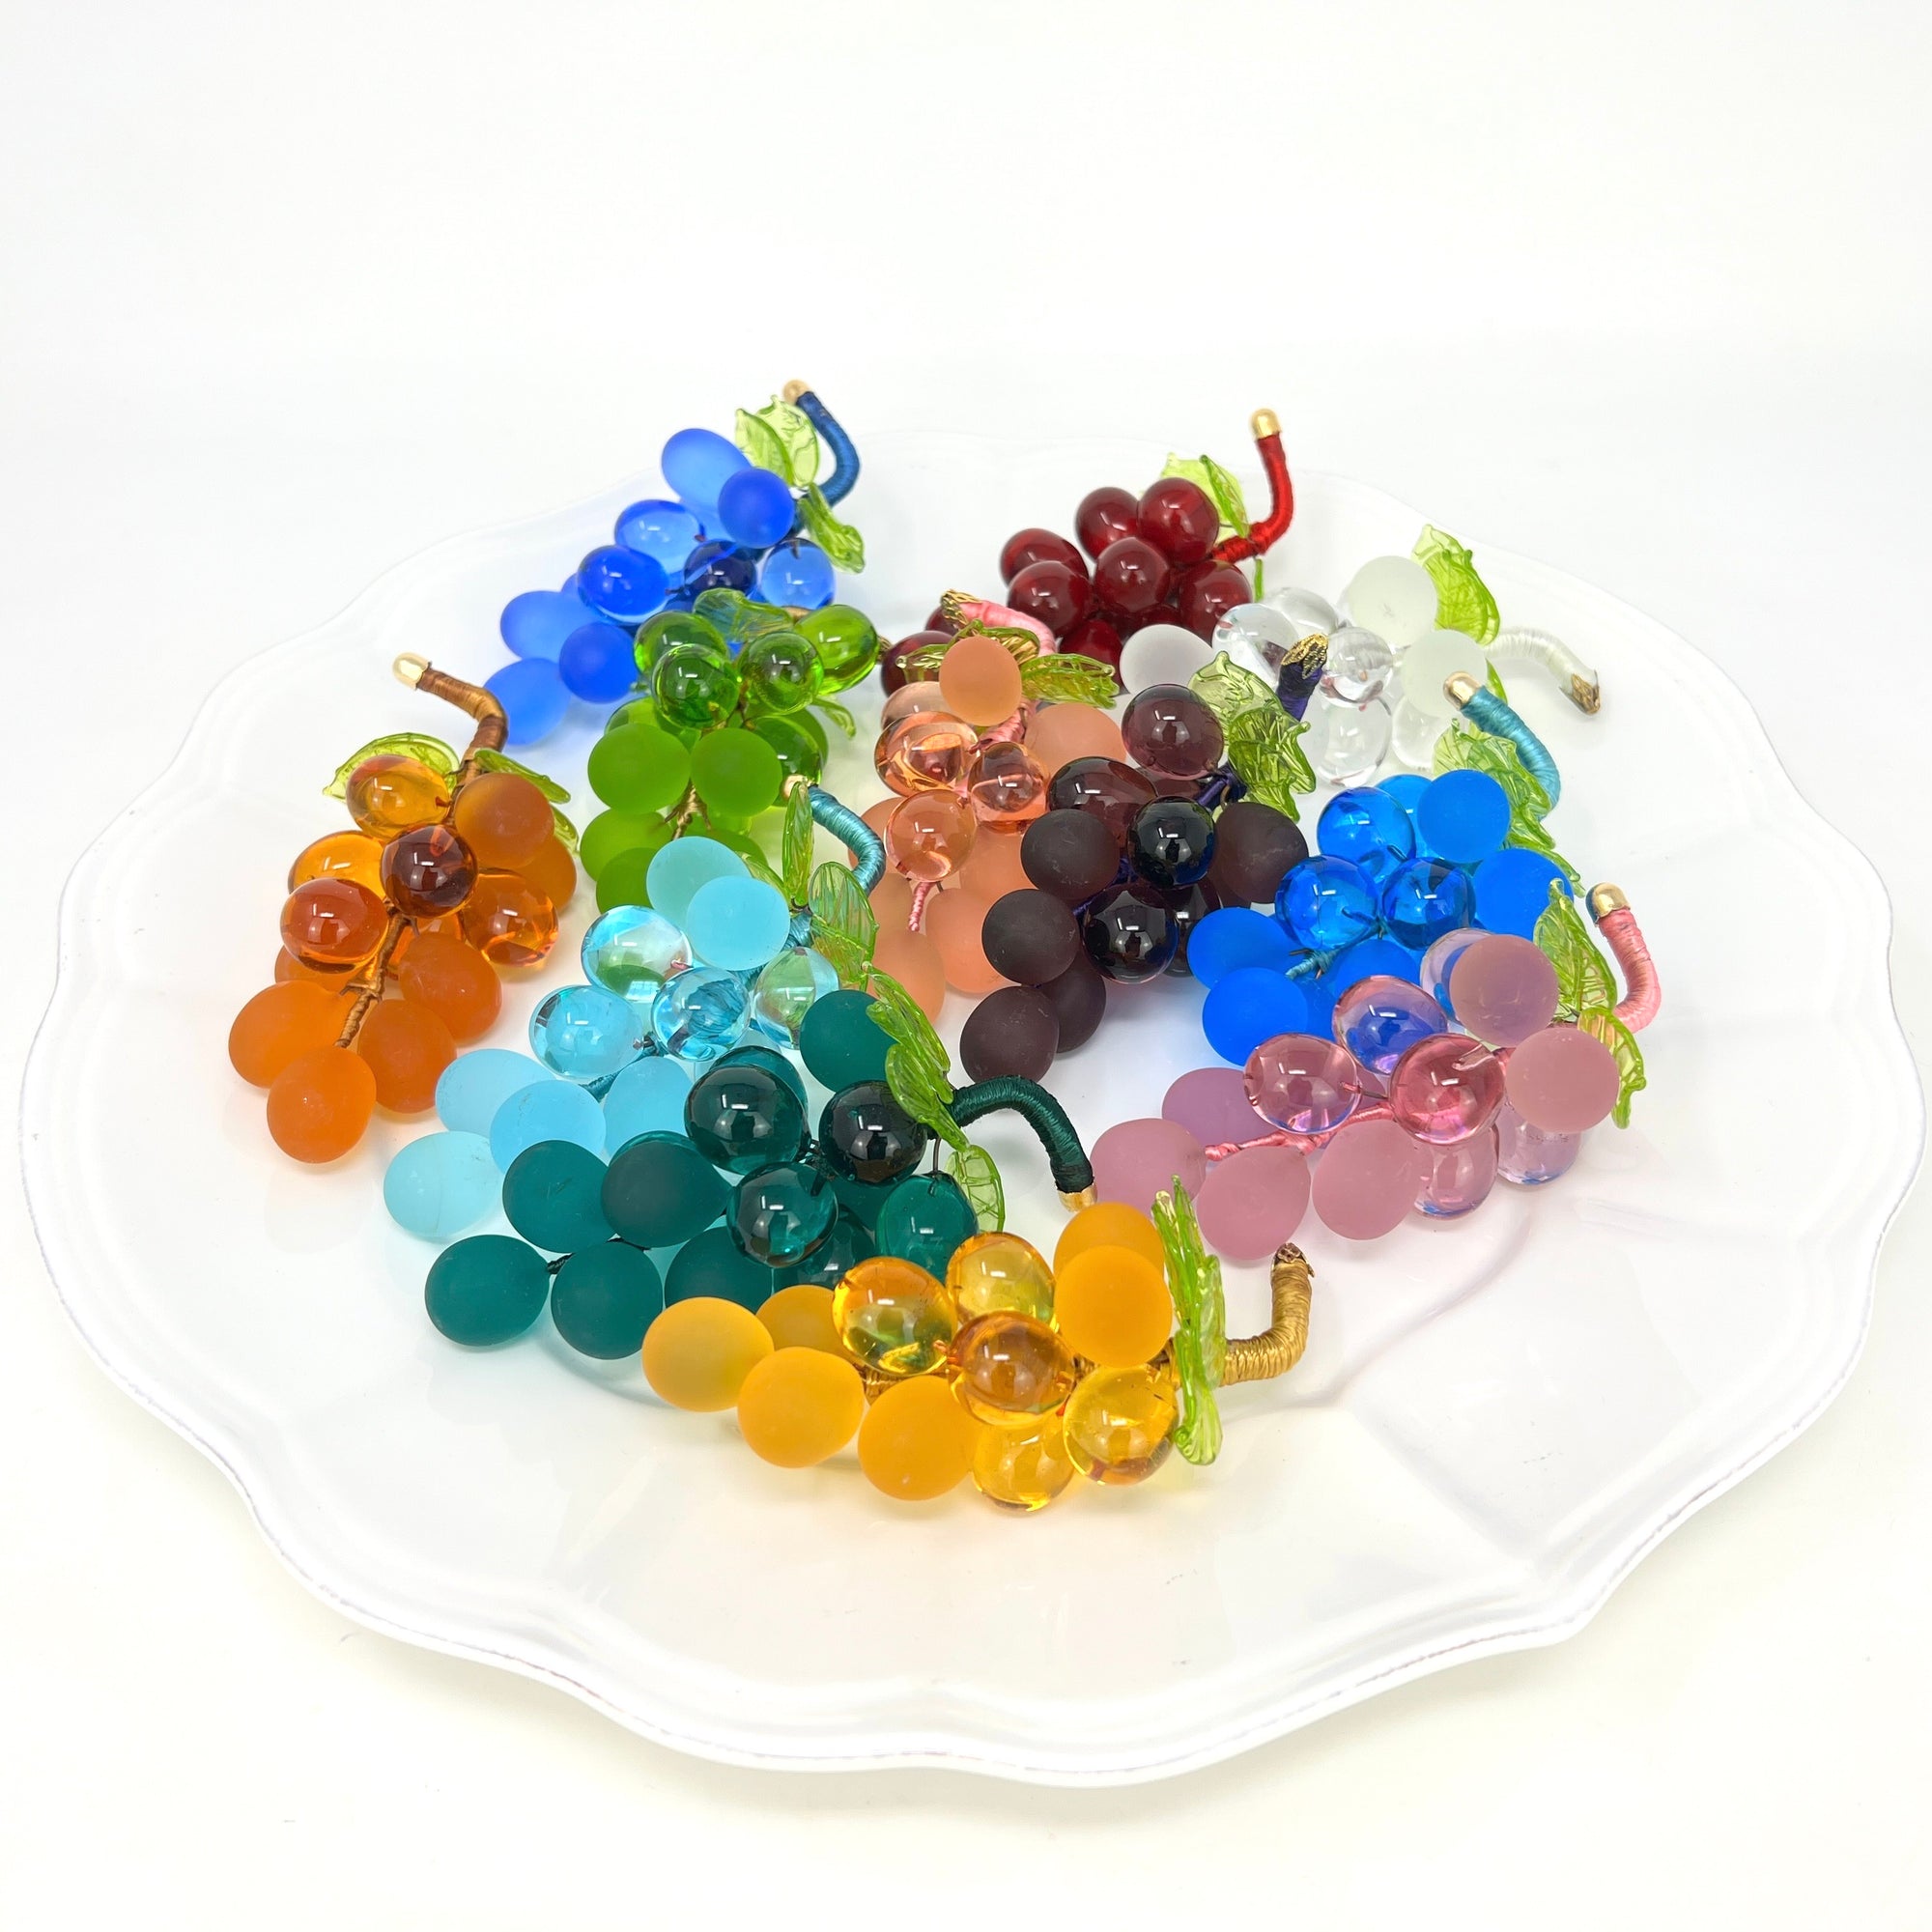 Murano Glass Solid Grape Cluster, Small, Multiple Colors, Made in Italy - My Italian Decor